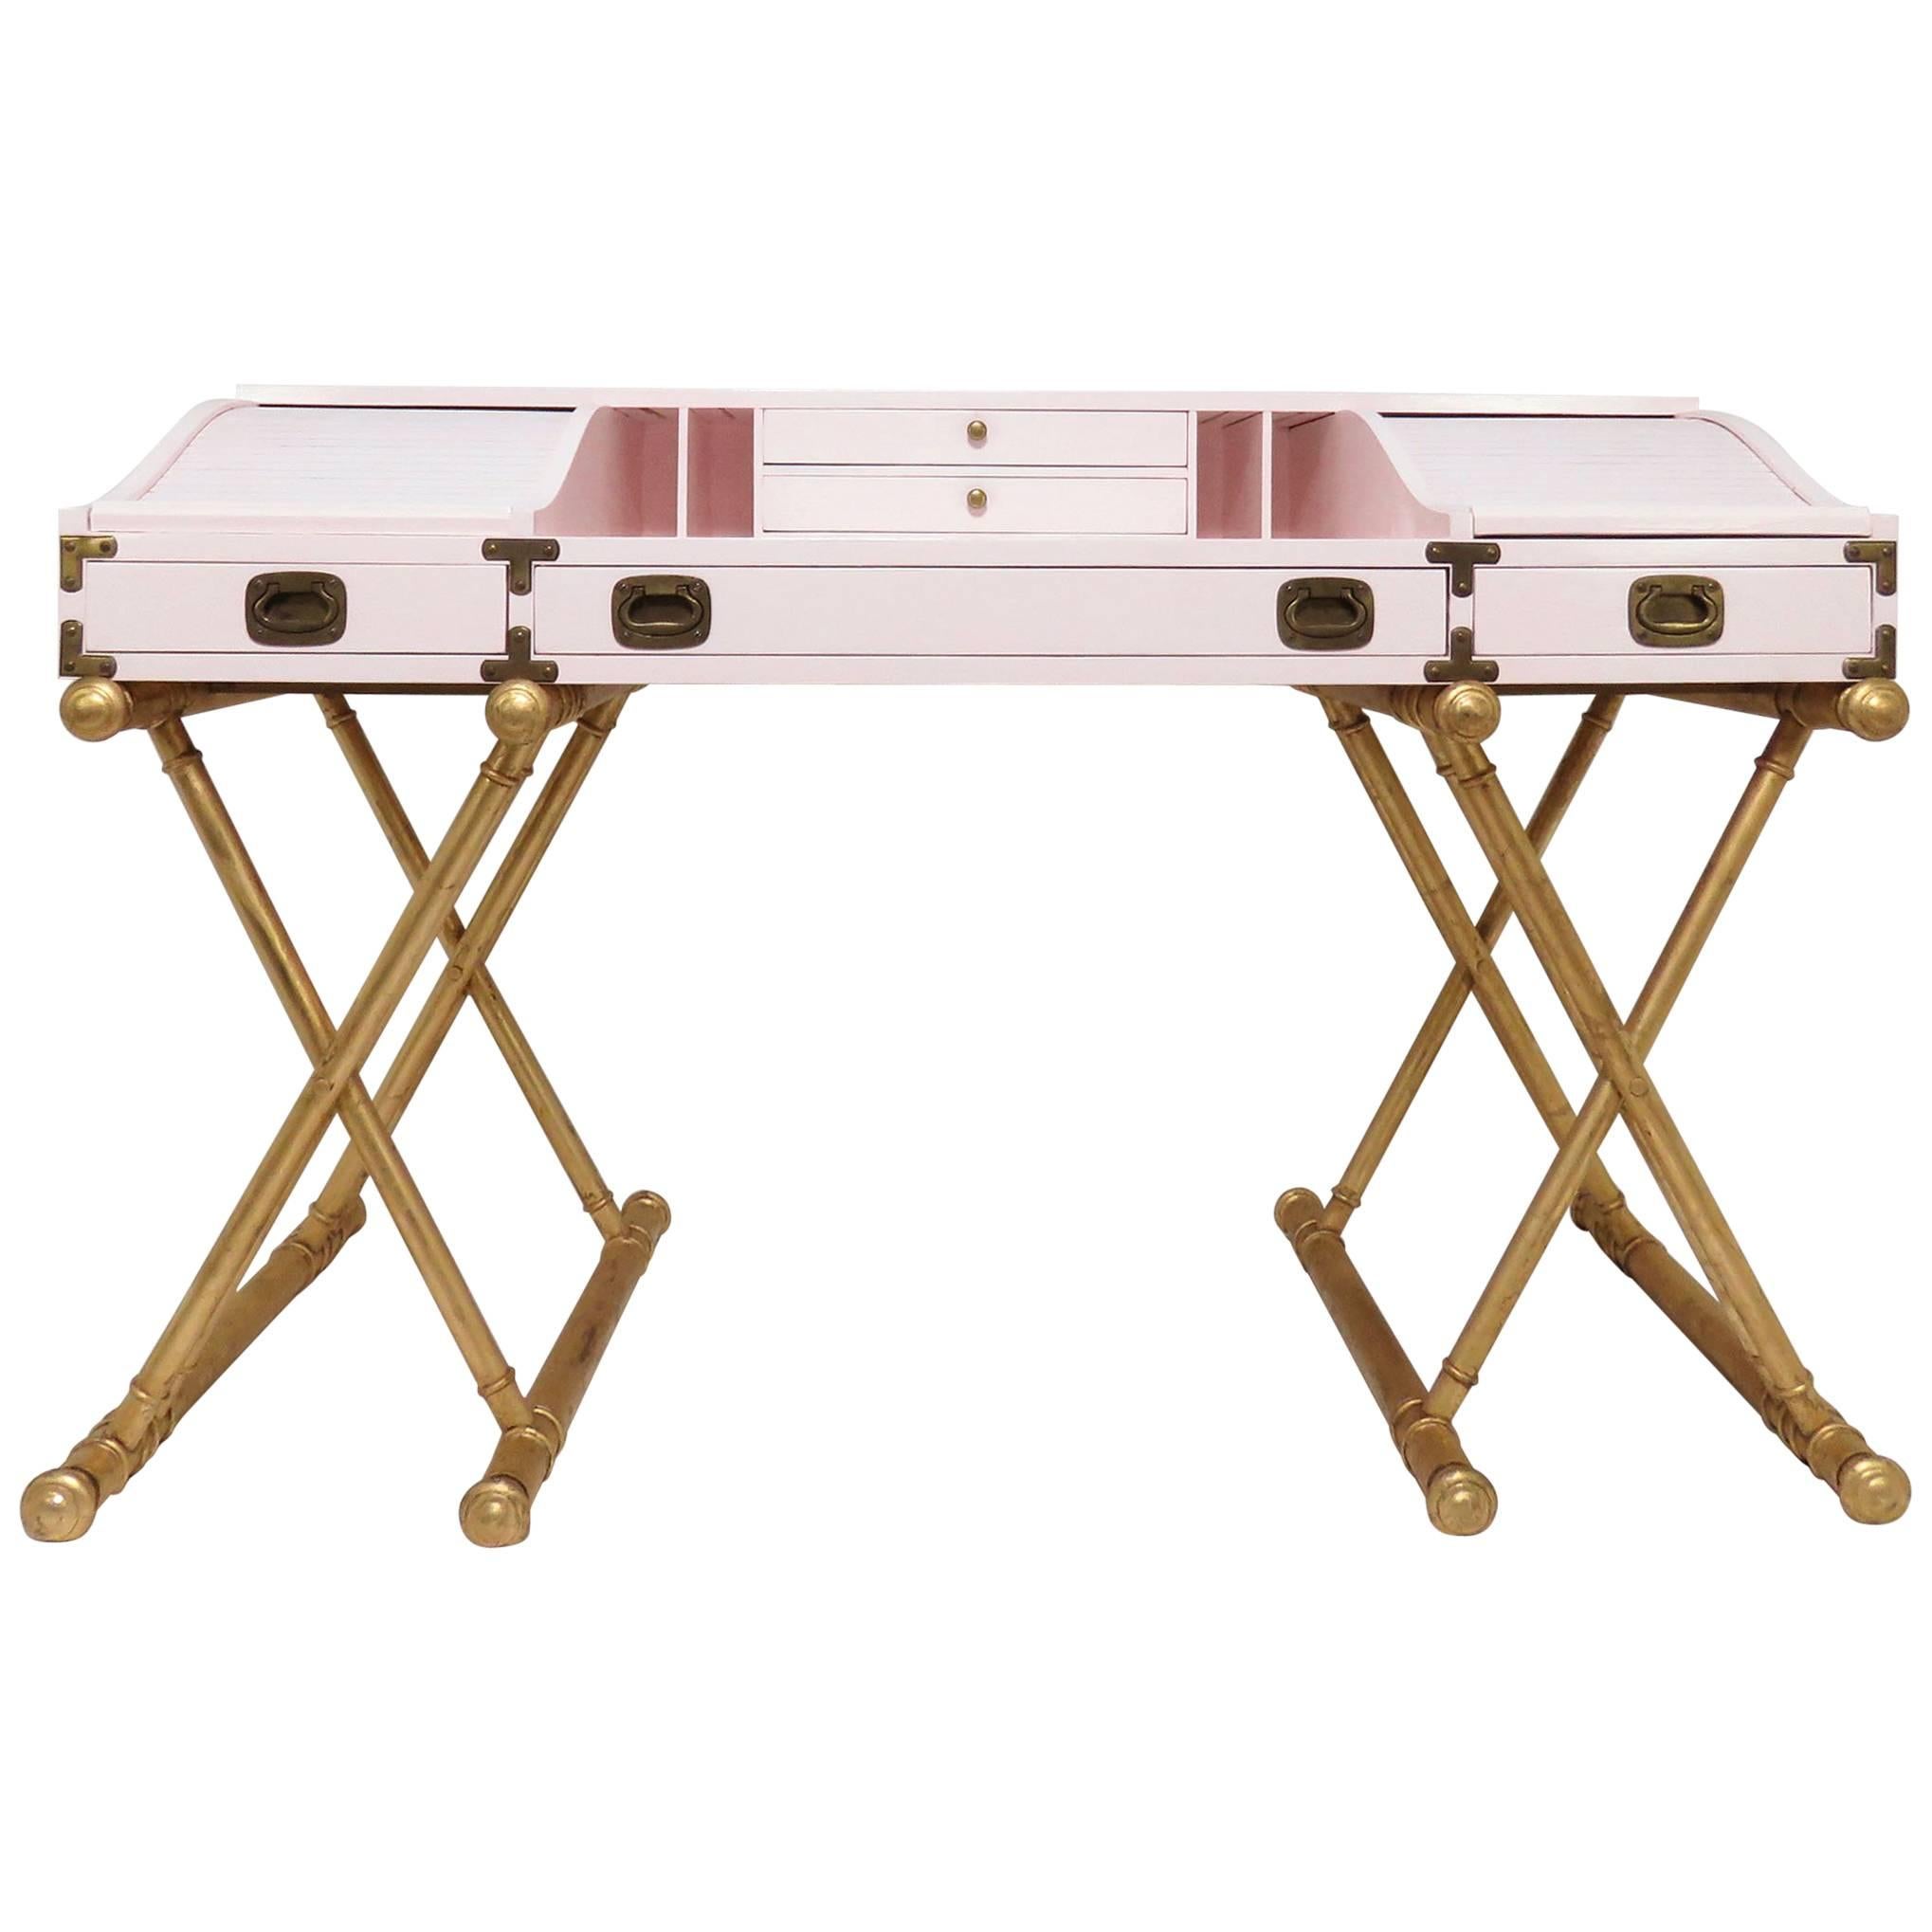 Campaign Roll Top Desk on Gilt X-Form Legs by Drexel